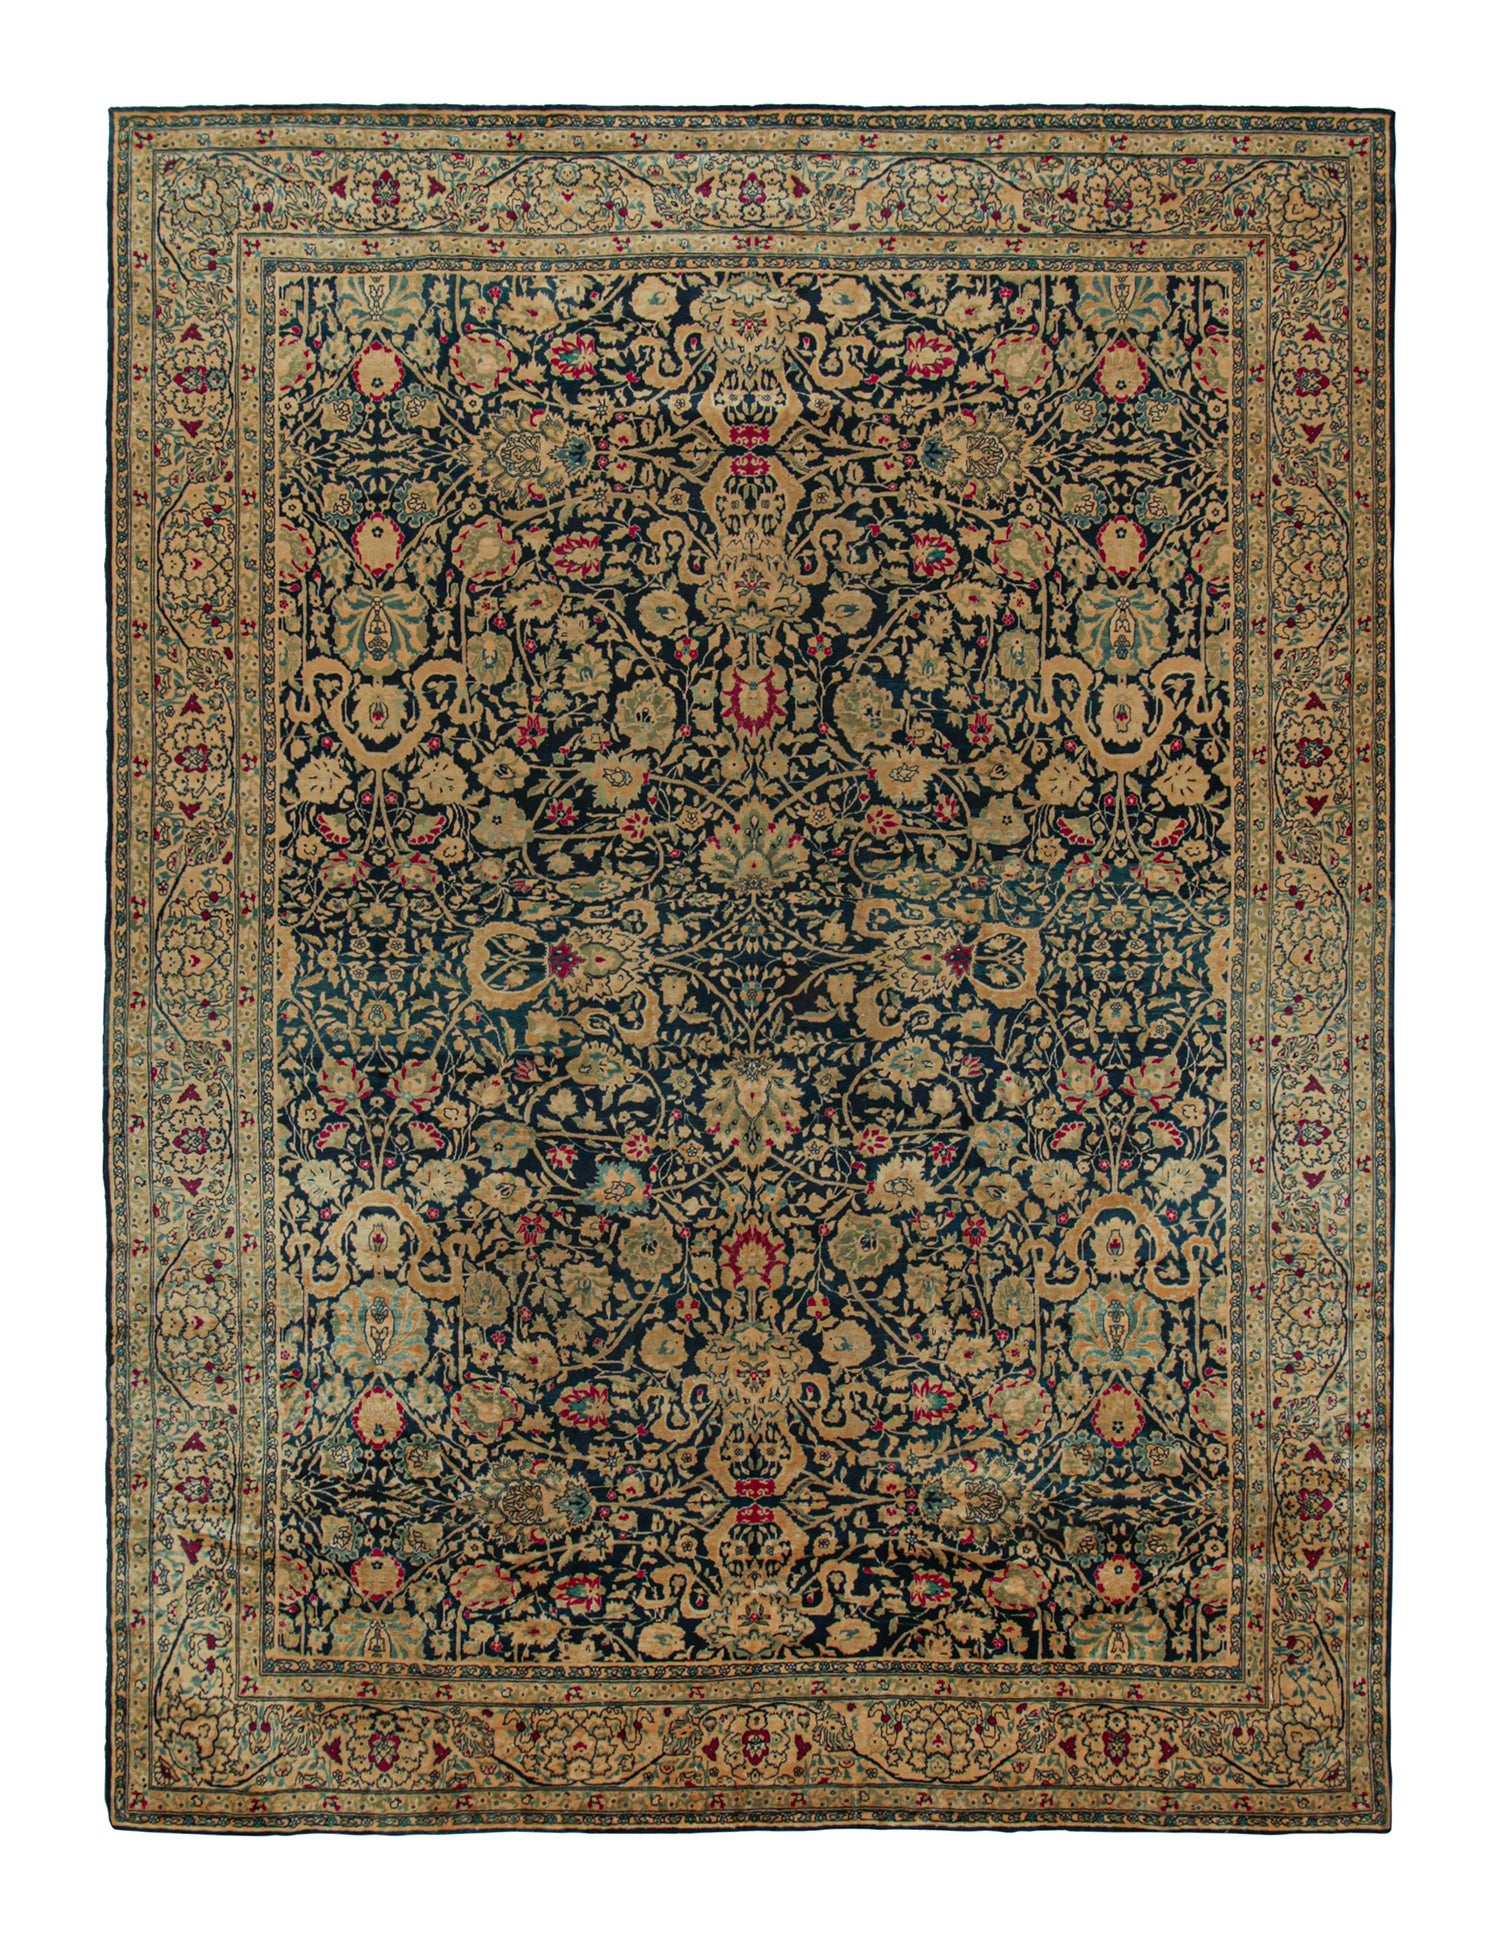 Vintage Indian Chain Stitch Rug, in Room Size, with Medallion and Flowers  For Sale at 1stDibs